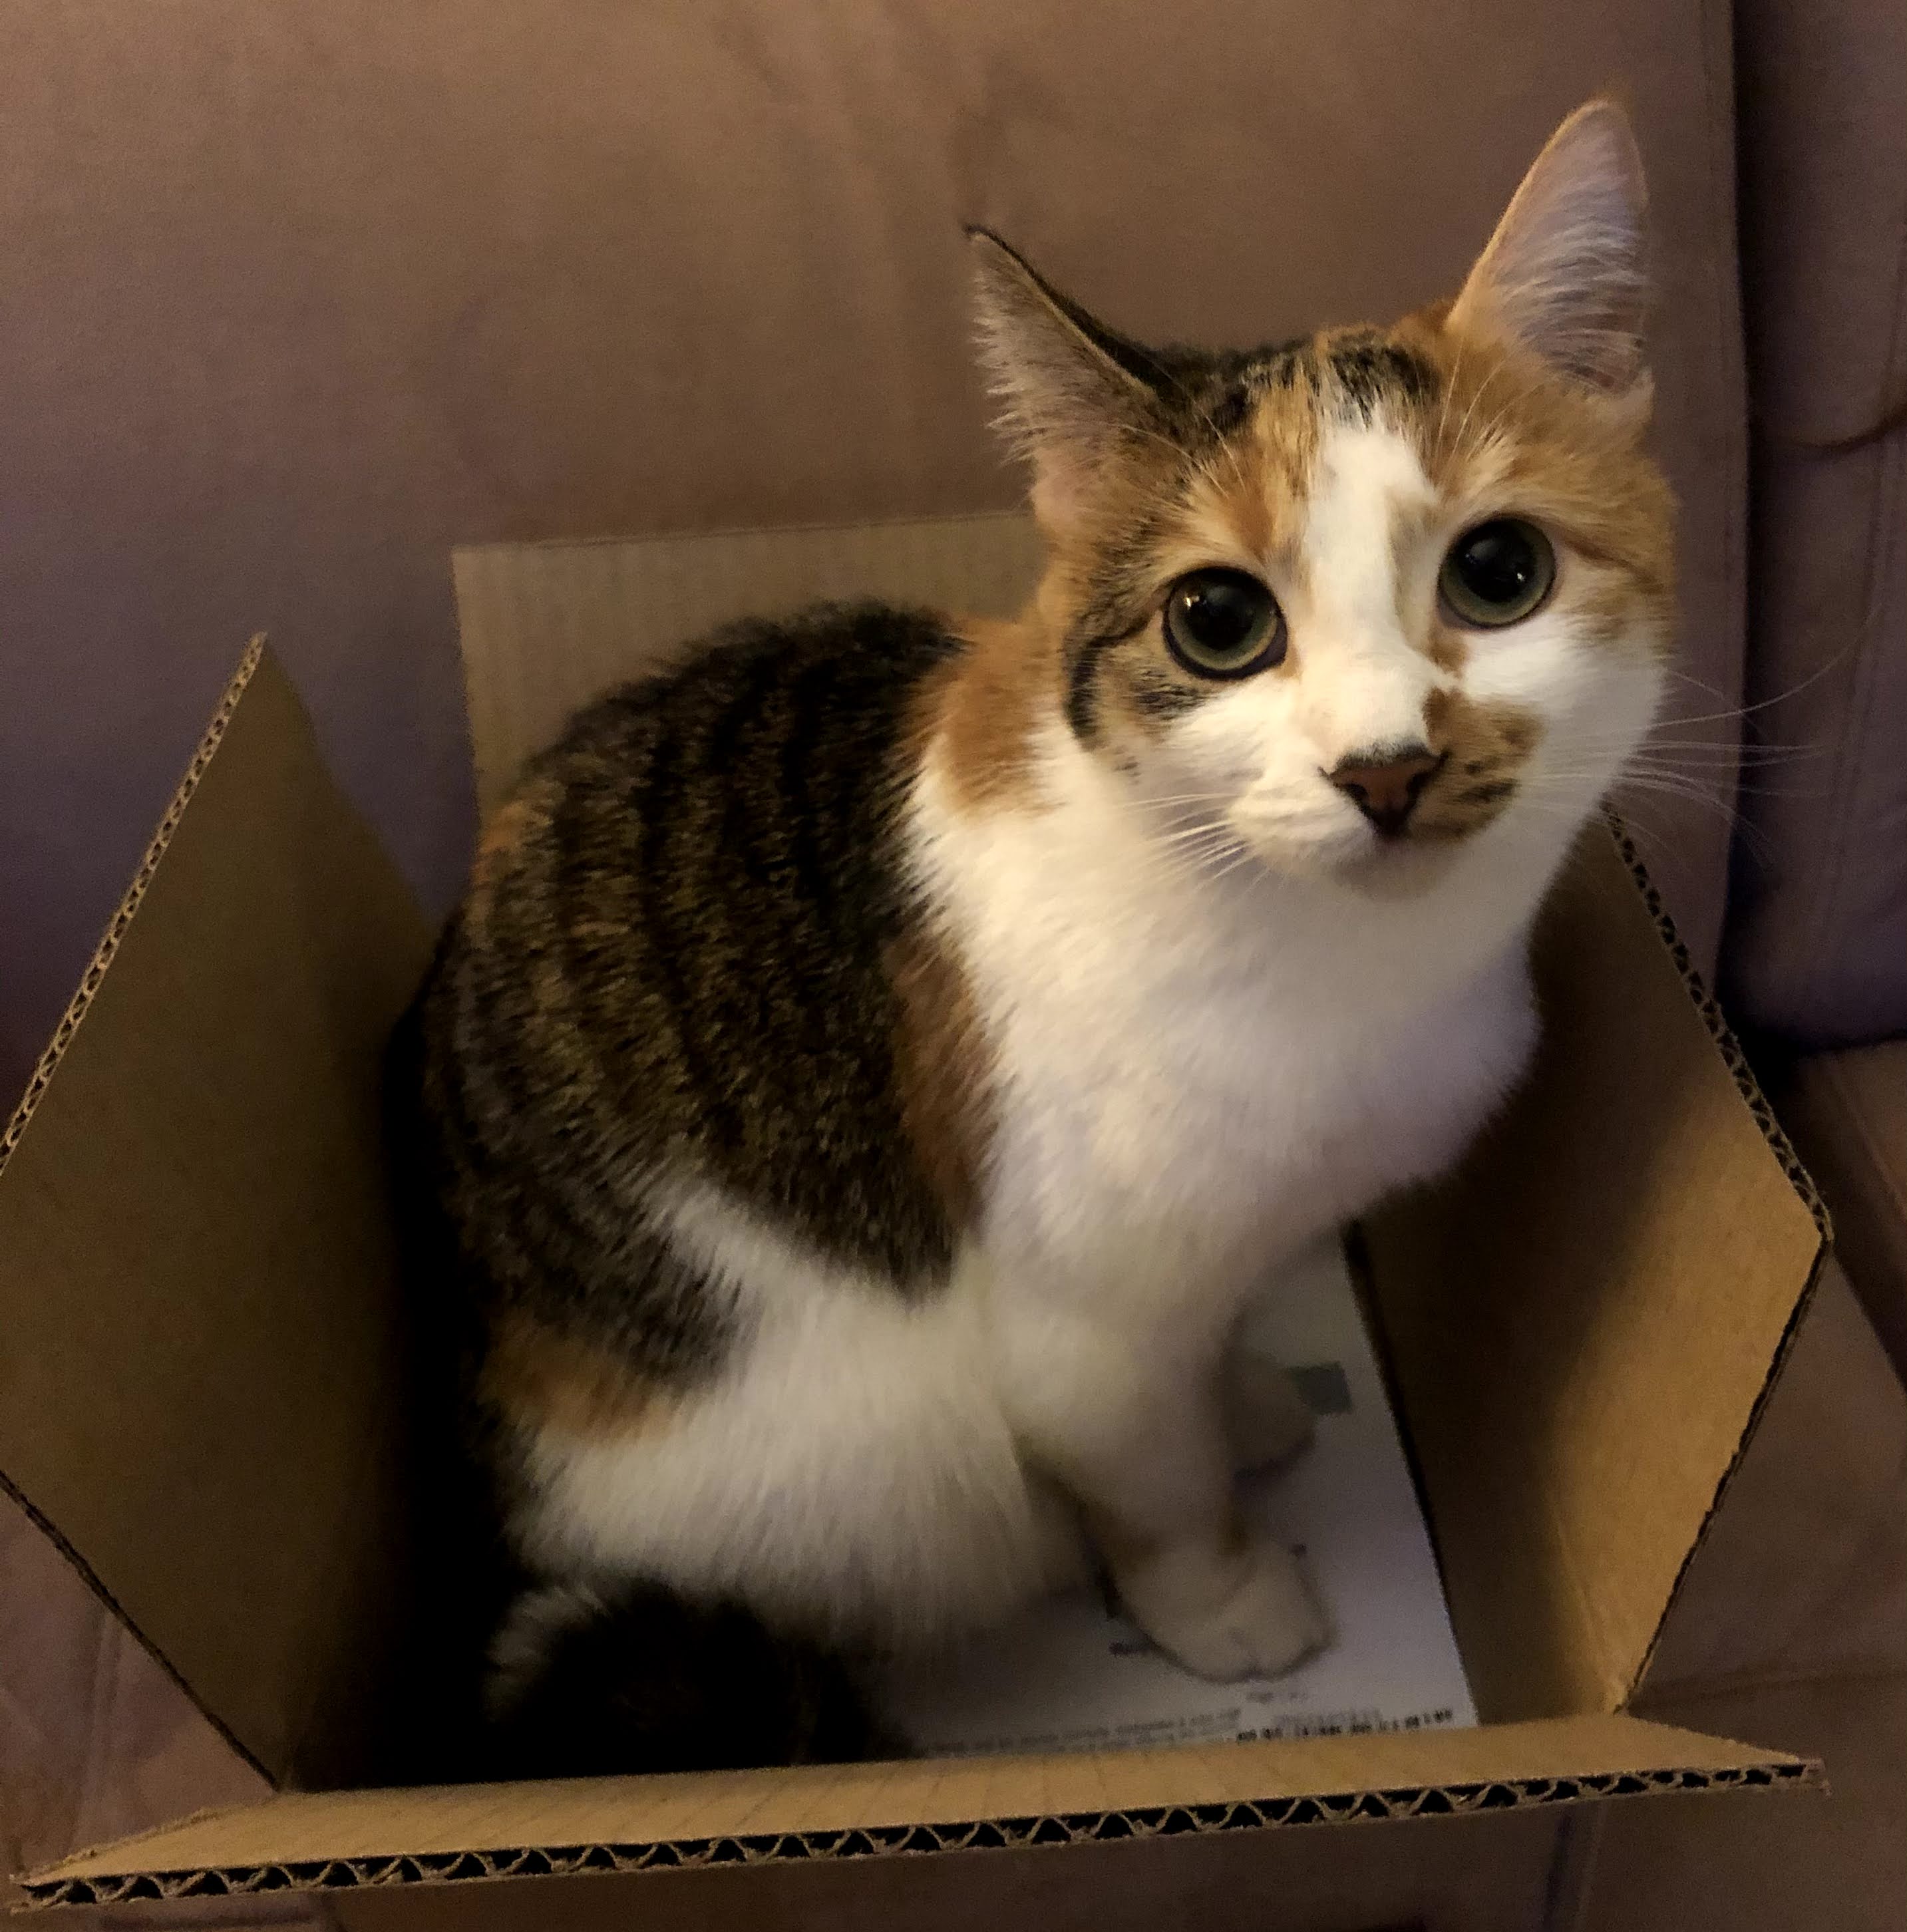 Yue in a Box